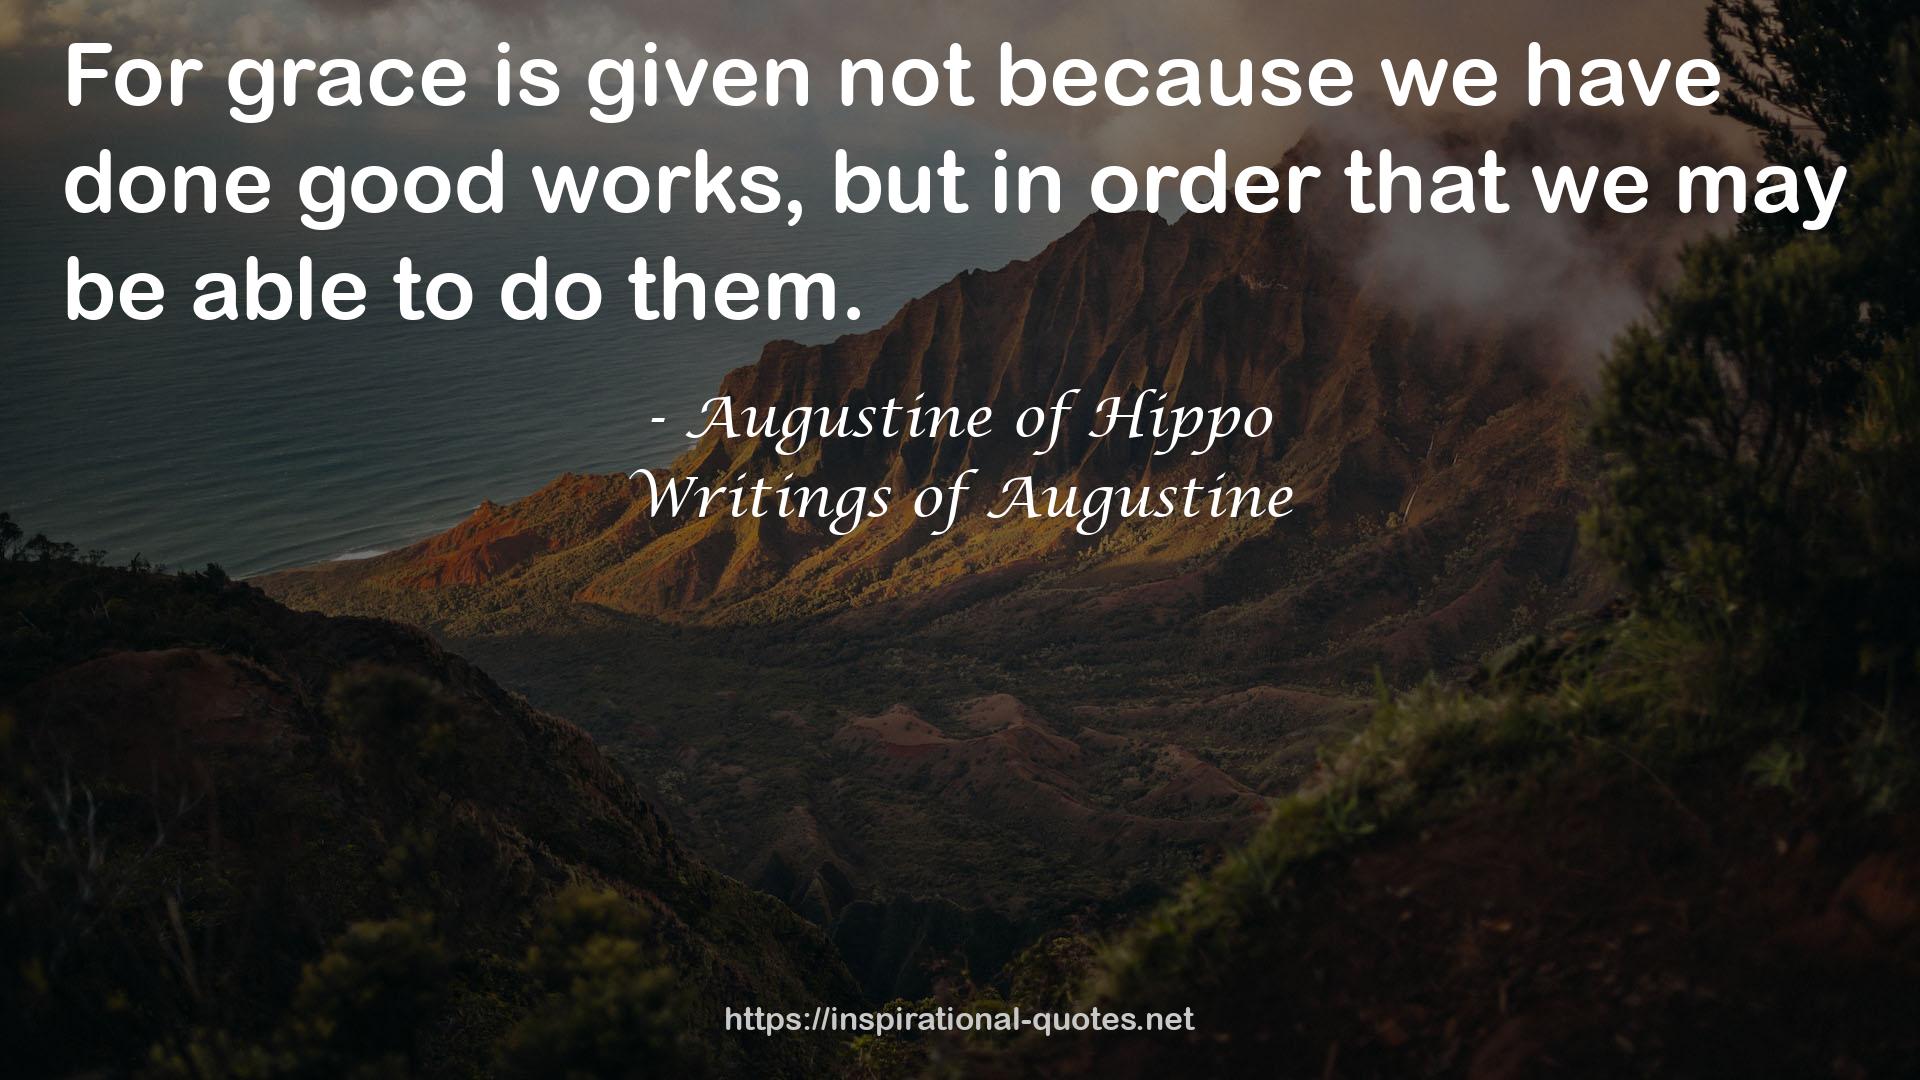 Writings of Augustine QUOTES